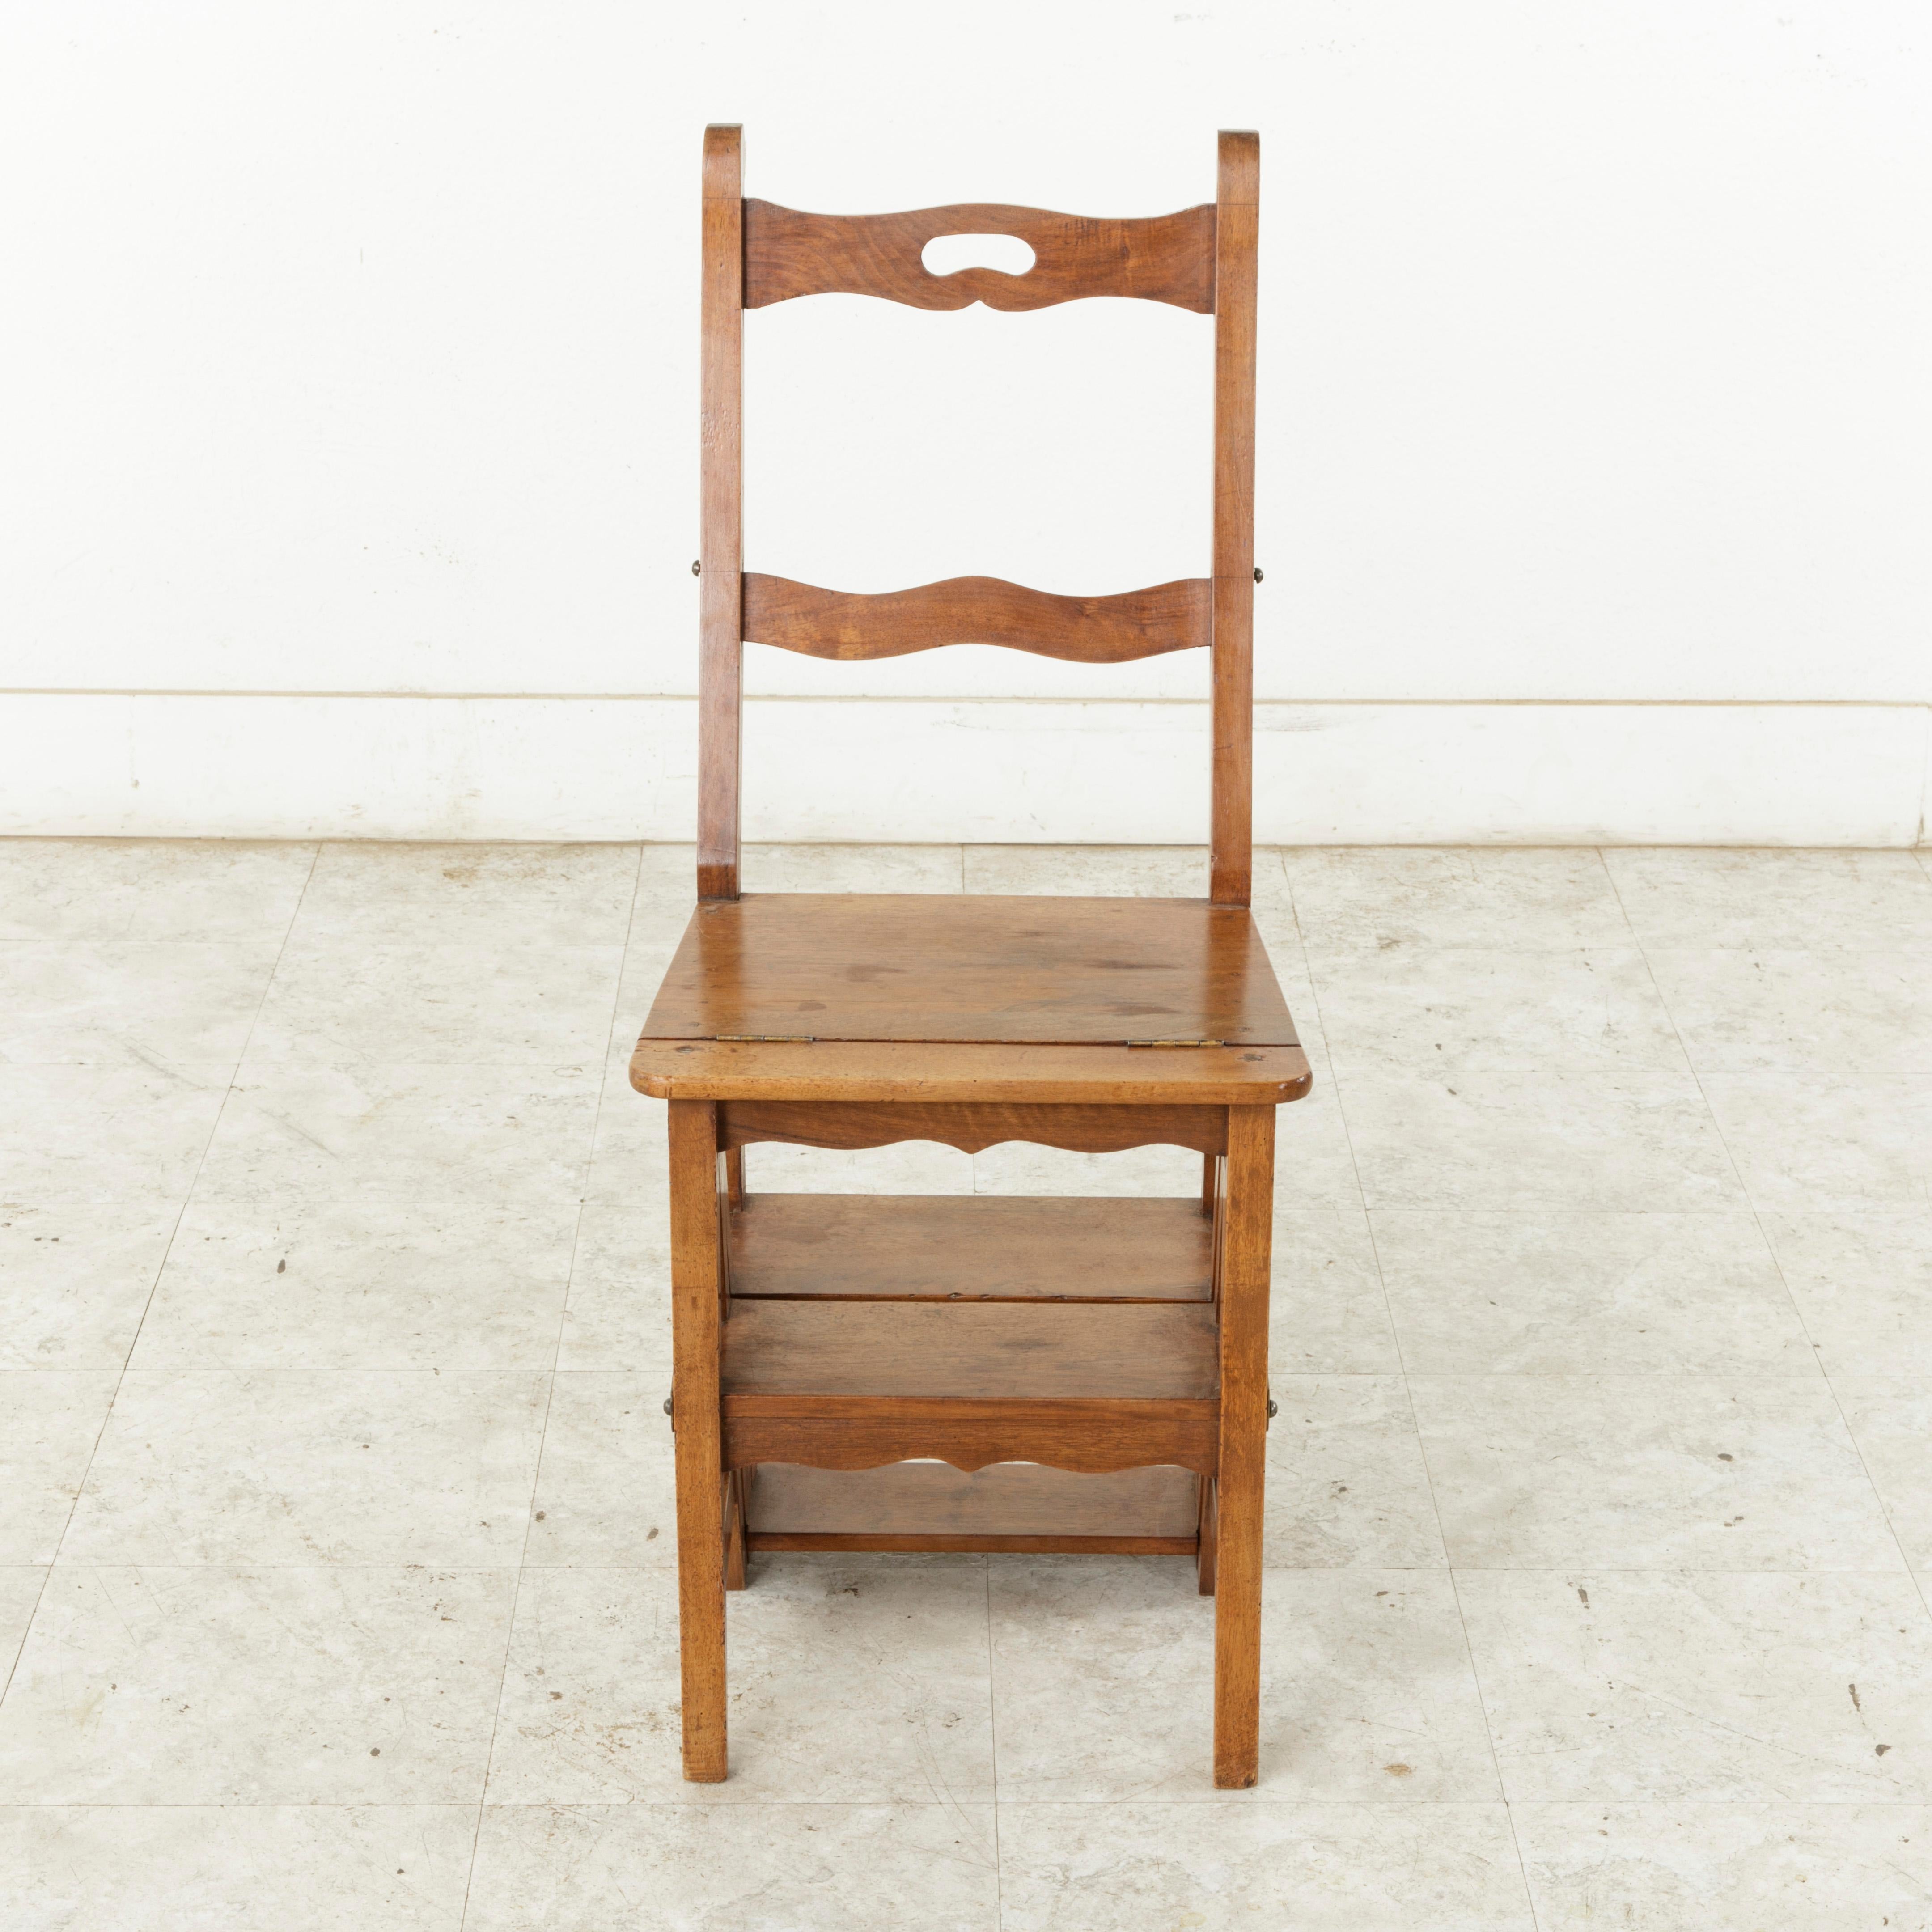 From the region of Provence in Southern France, this artisan-made walnut folding chair is hinged so that it can convert into a step ladder. Metal straps with hooks allow the piece to be secured in place both as a chair or ladder. When used as a